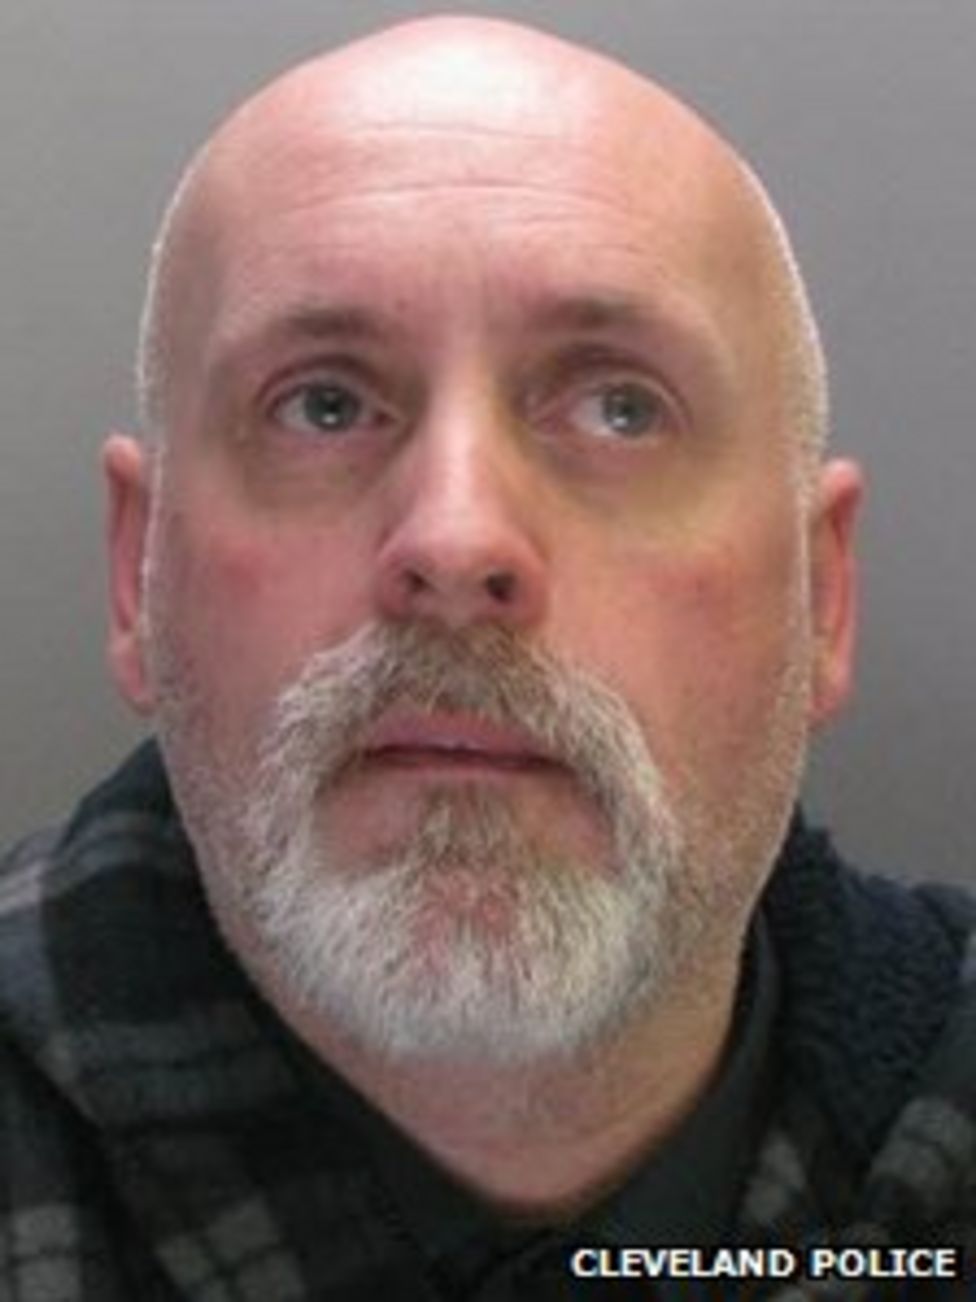 Facebook Paedophile Jailed For Attempting To Groom Girls For Sex Bbc News 1065